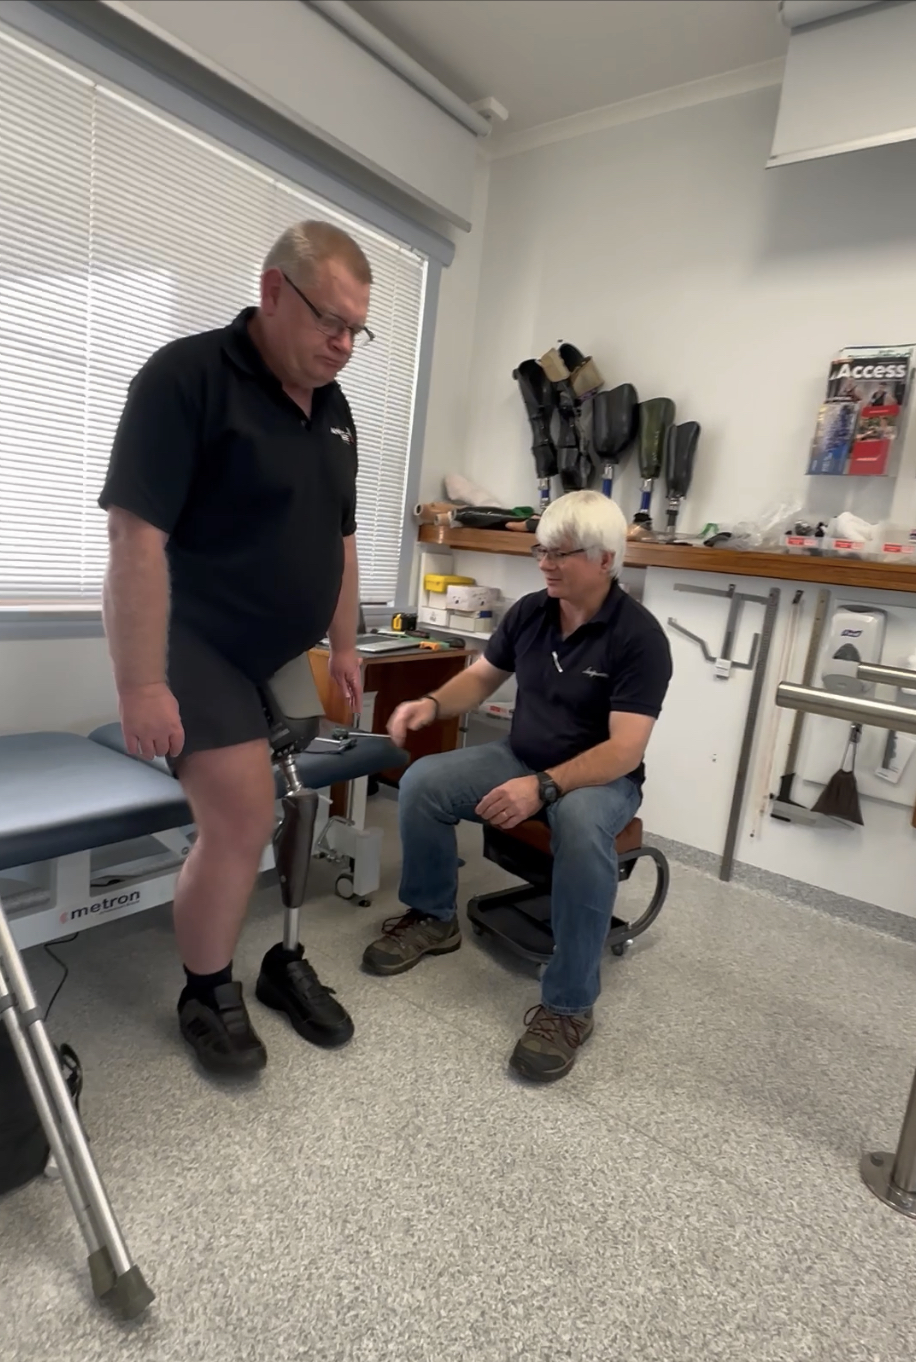 The excitement and challenges in learning how to walk again after 13 years.